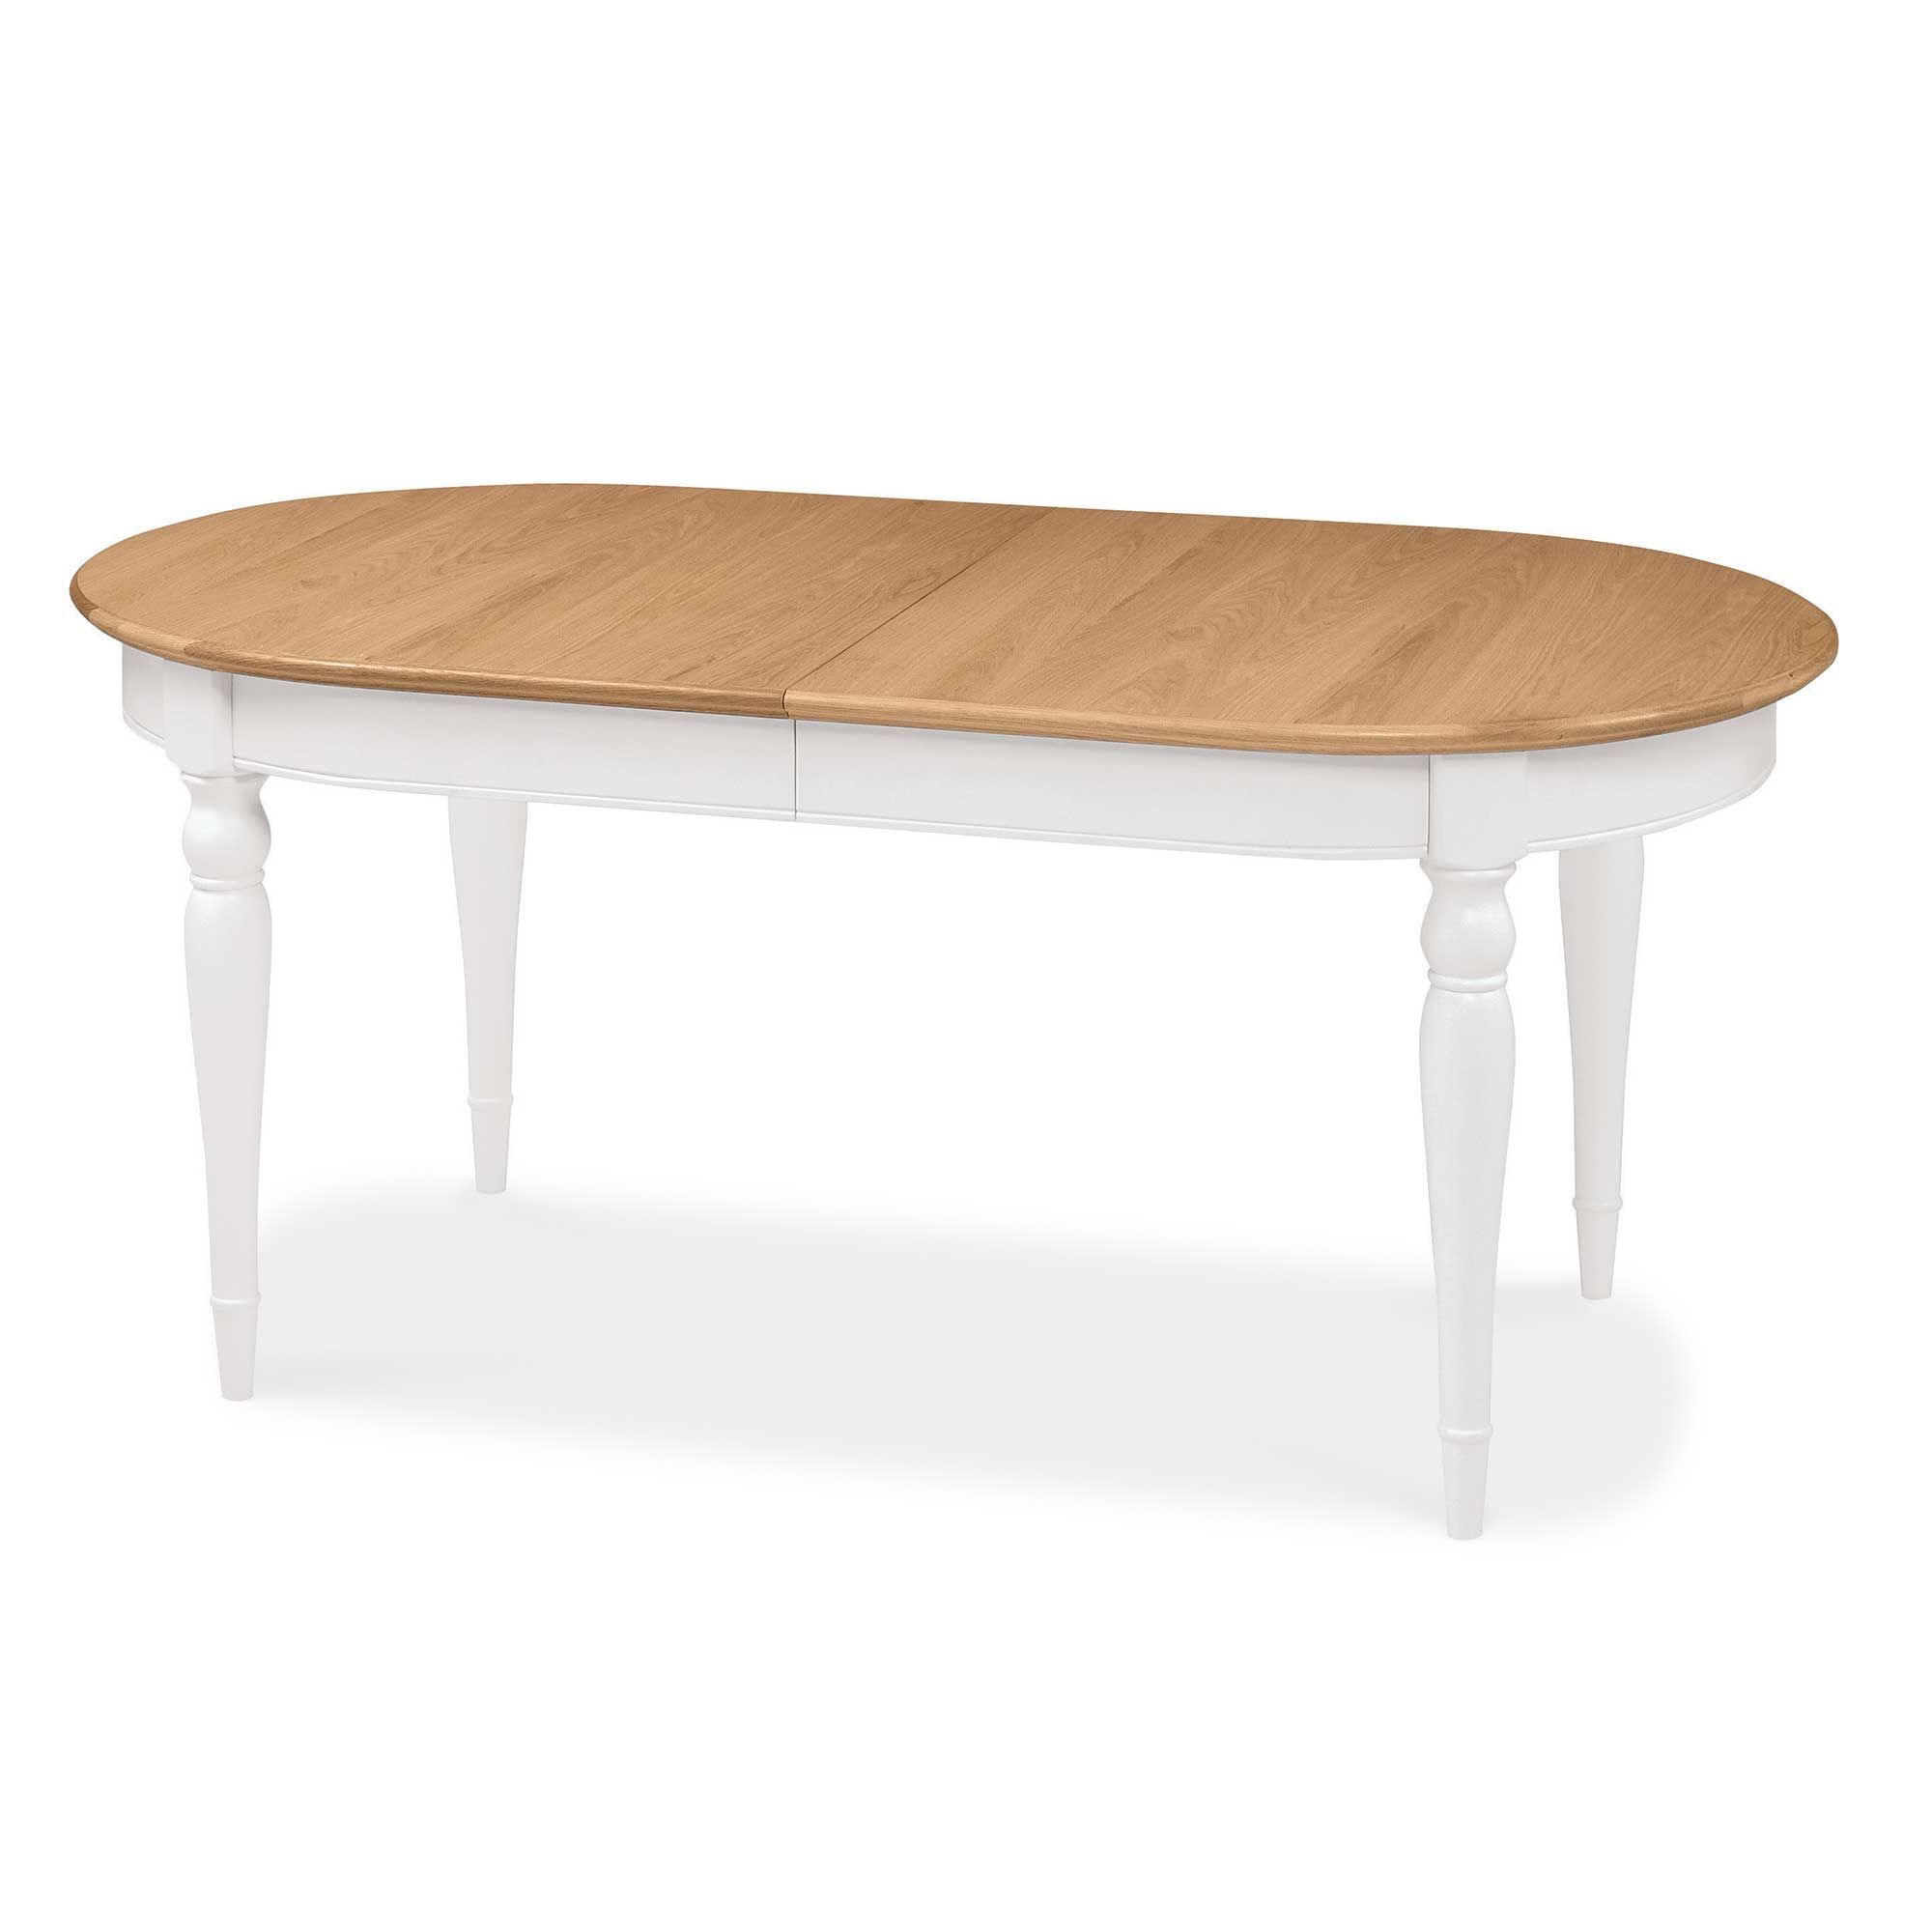 Widely Used Carrington 6 8 Extending Dining Table, Ivory And Oak Throughout Grimaldo  (View 7 of 20)